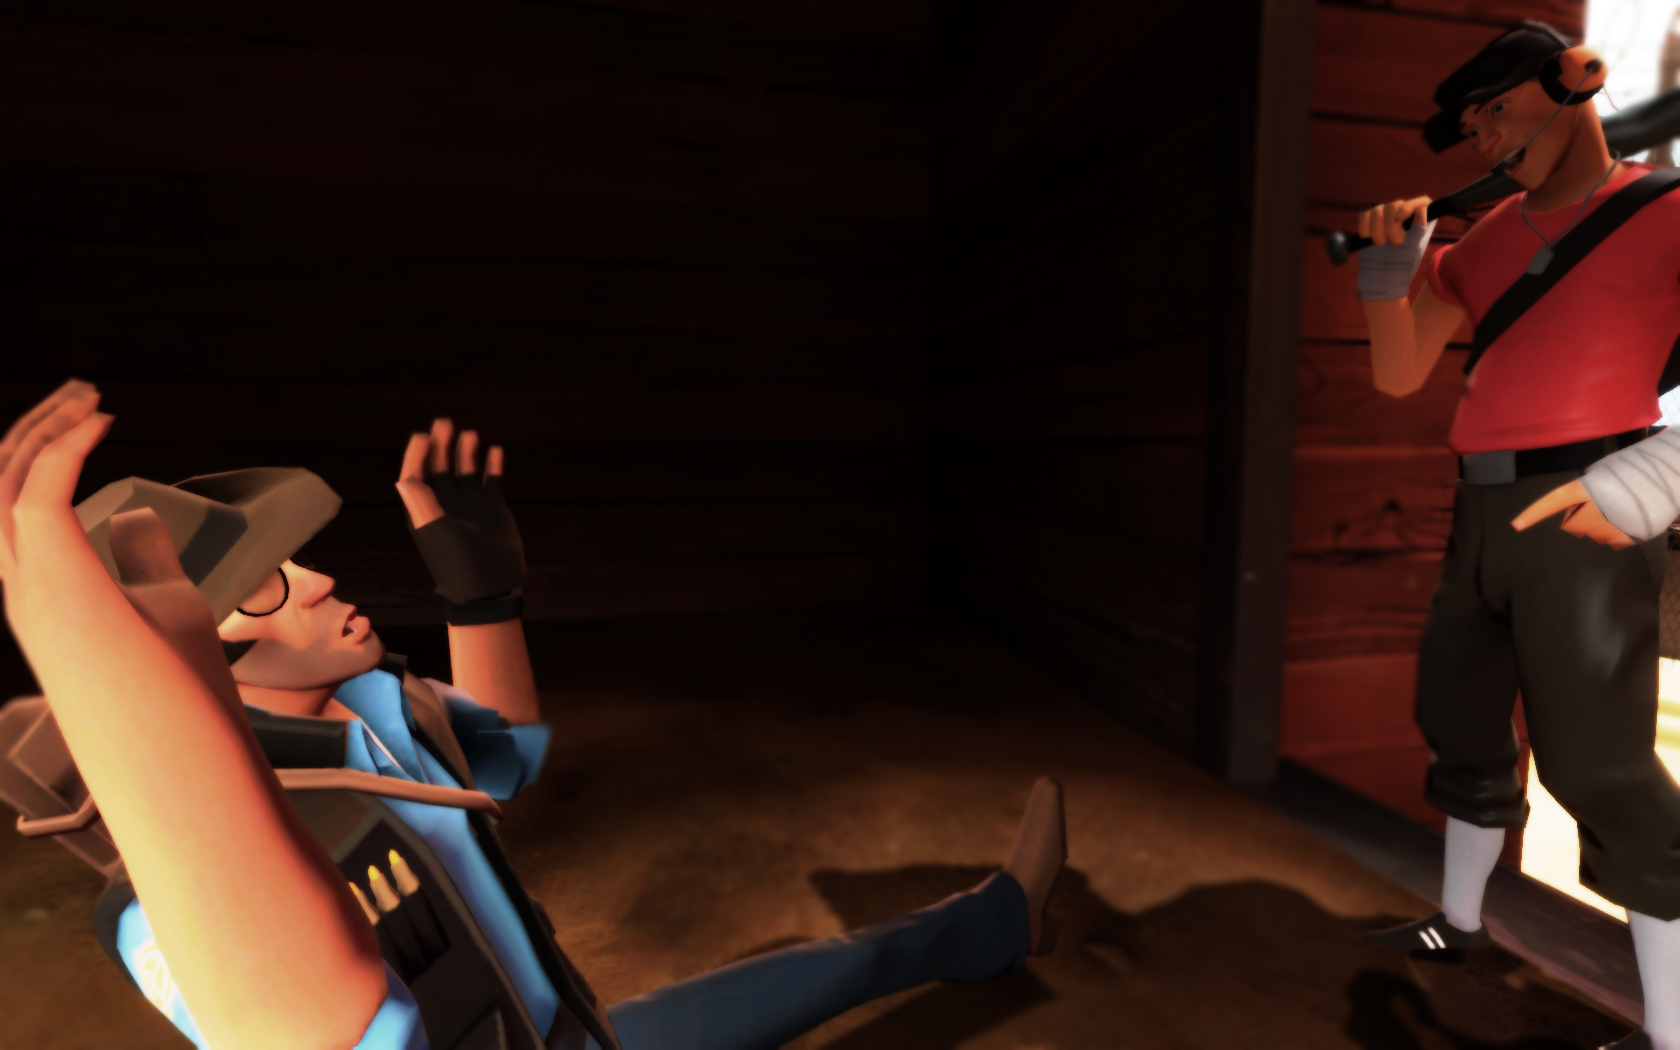 scout tf2 snipers team fortress 2 sniper HD Wallpaper of Architecture